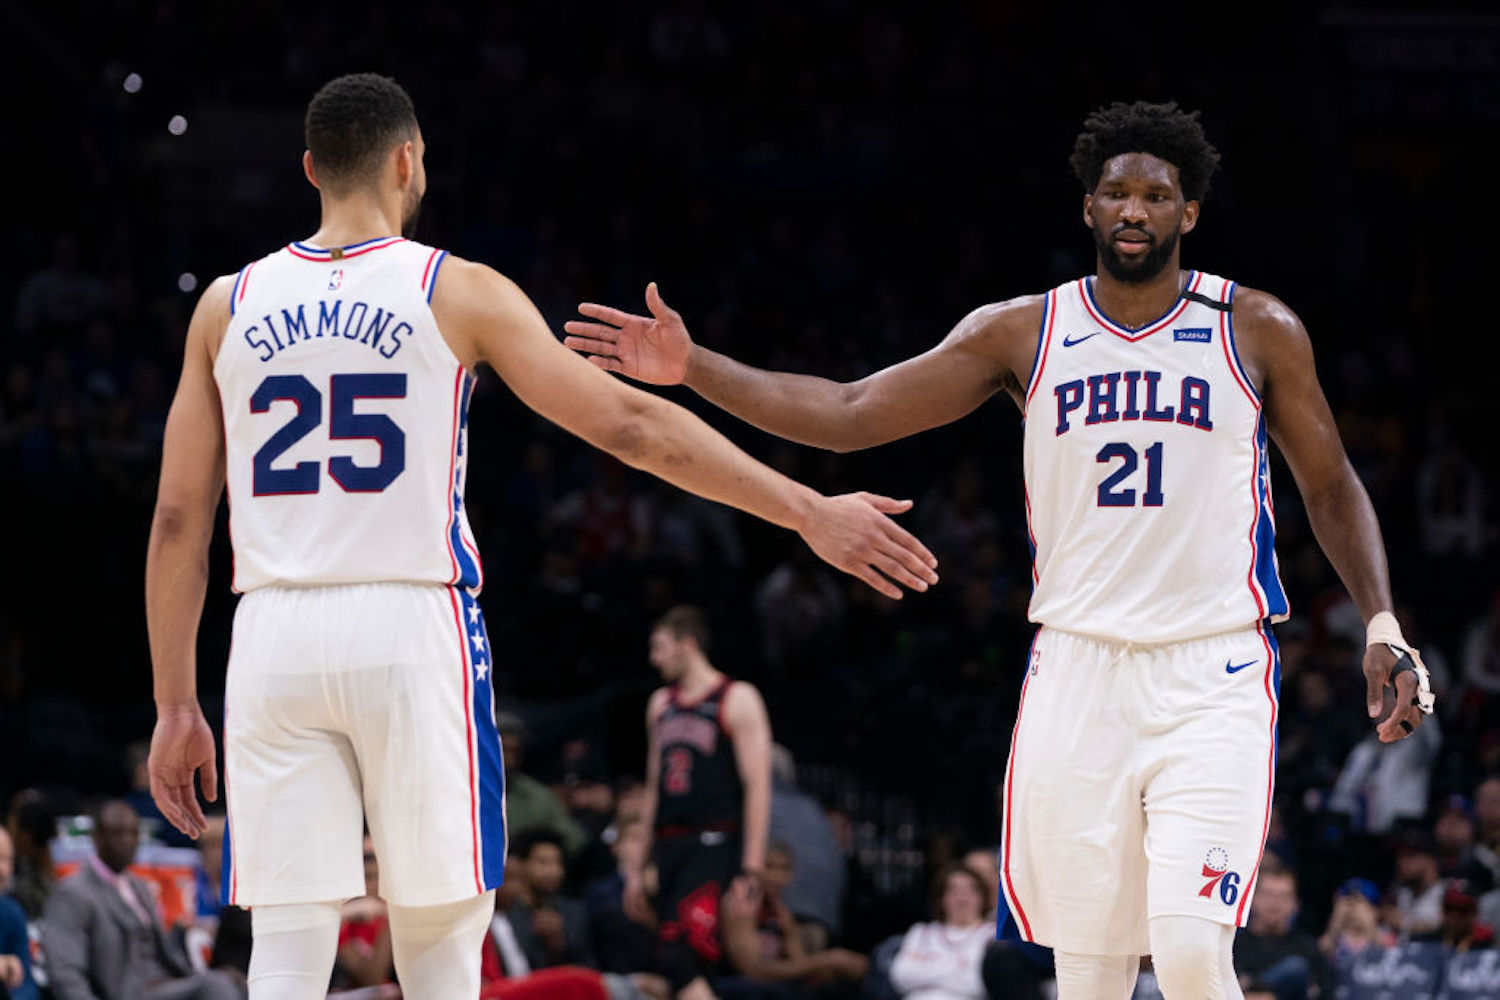 Ben Simmons is most likely out for the season with another injury. Have we seen the last of Simmons and Joel Embiid in Philadelphia?